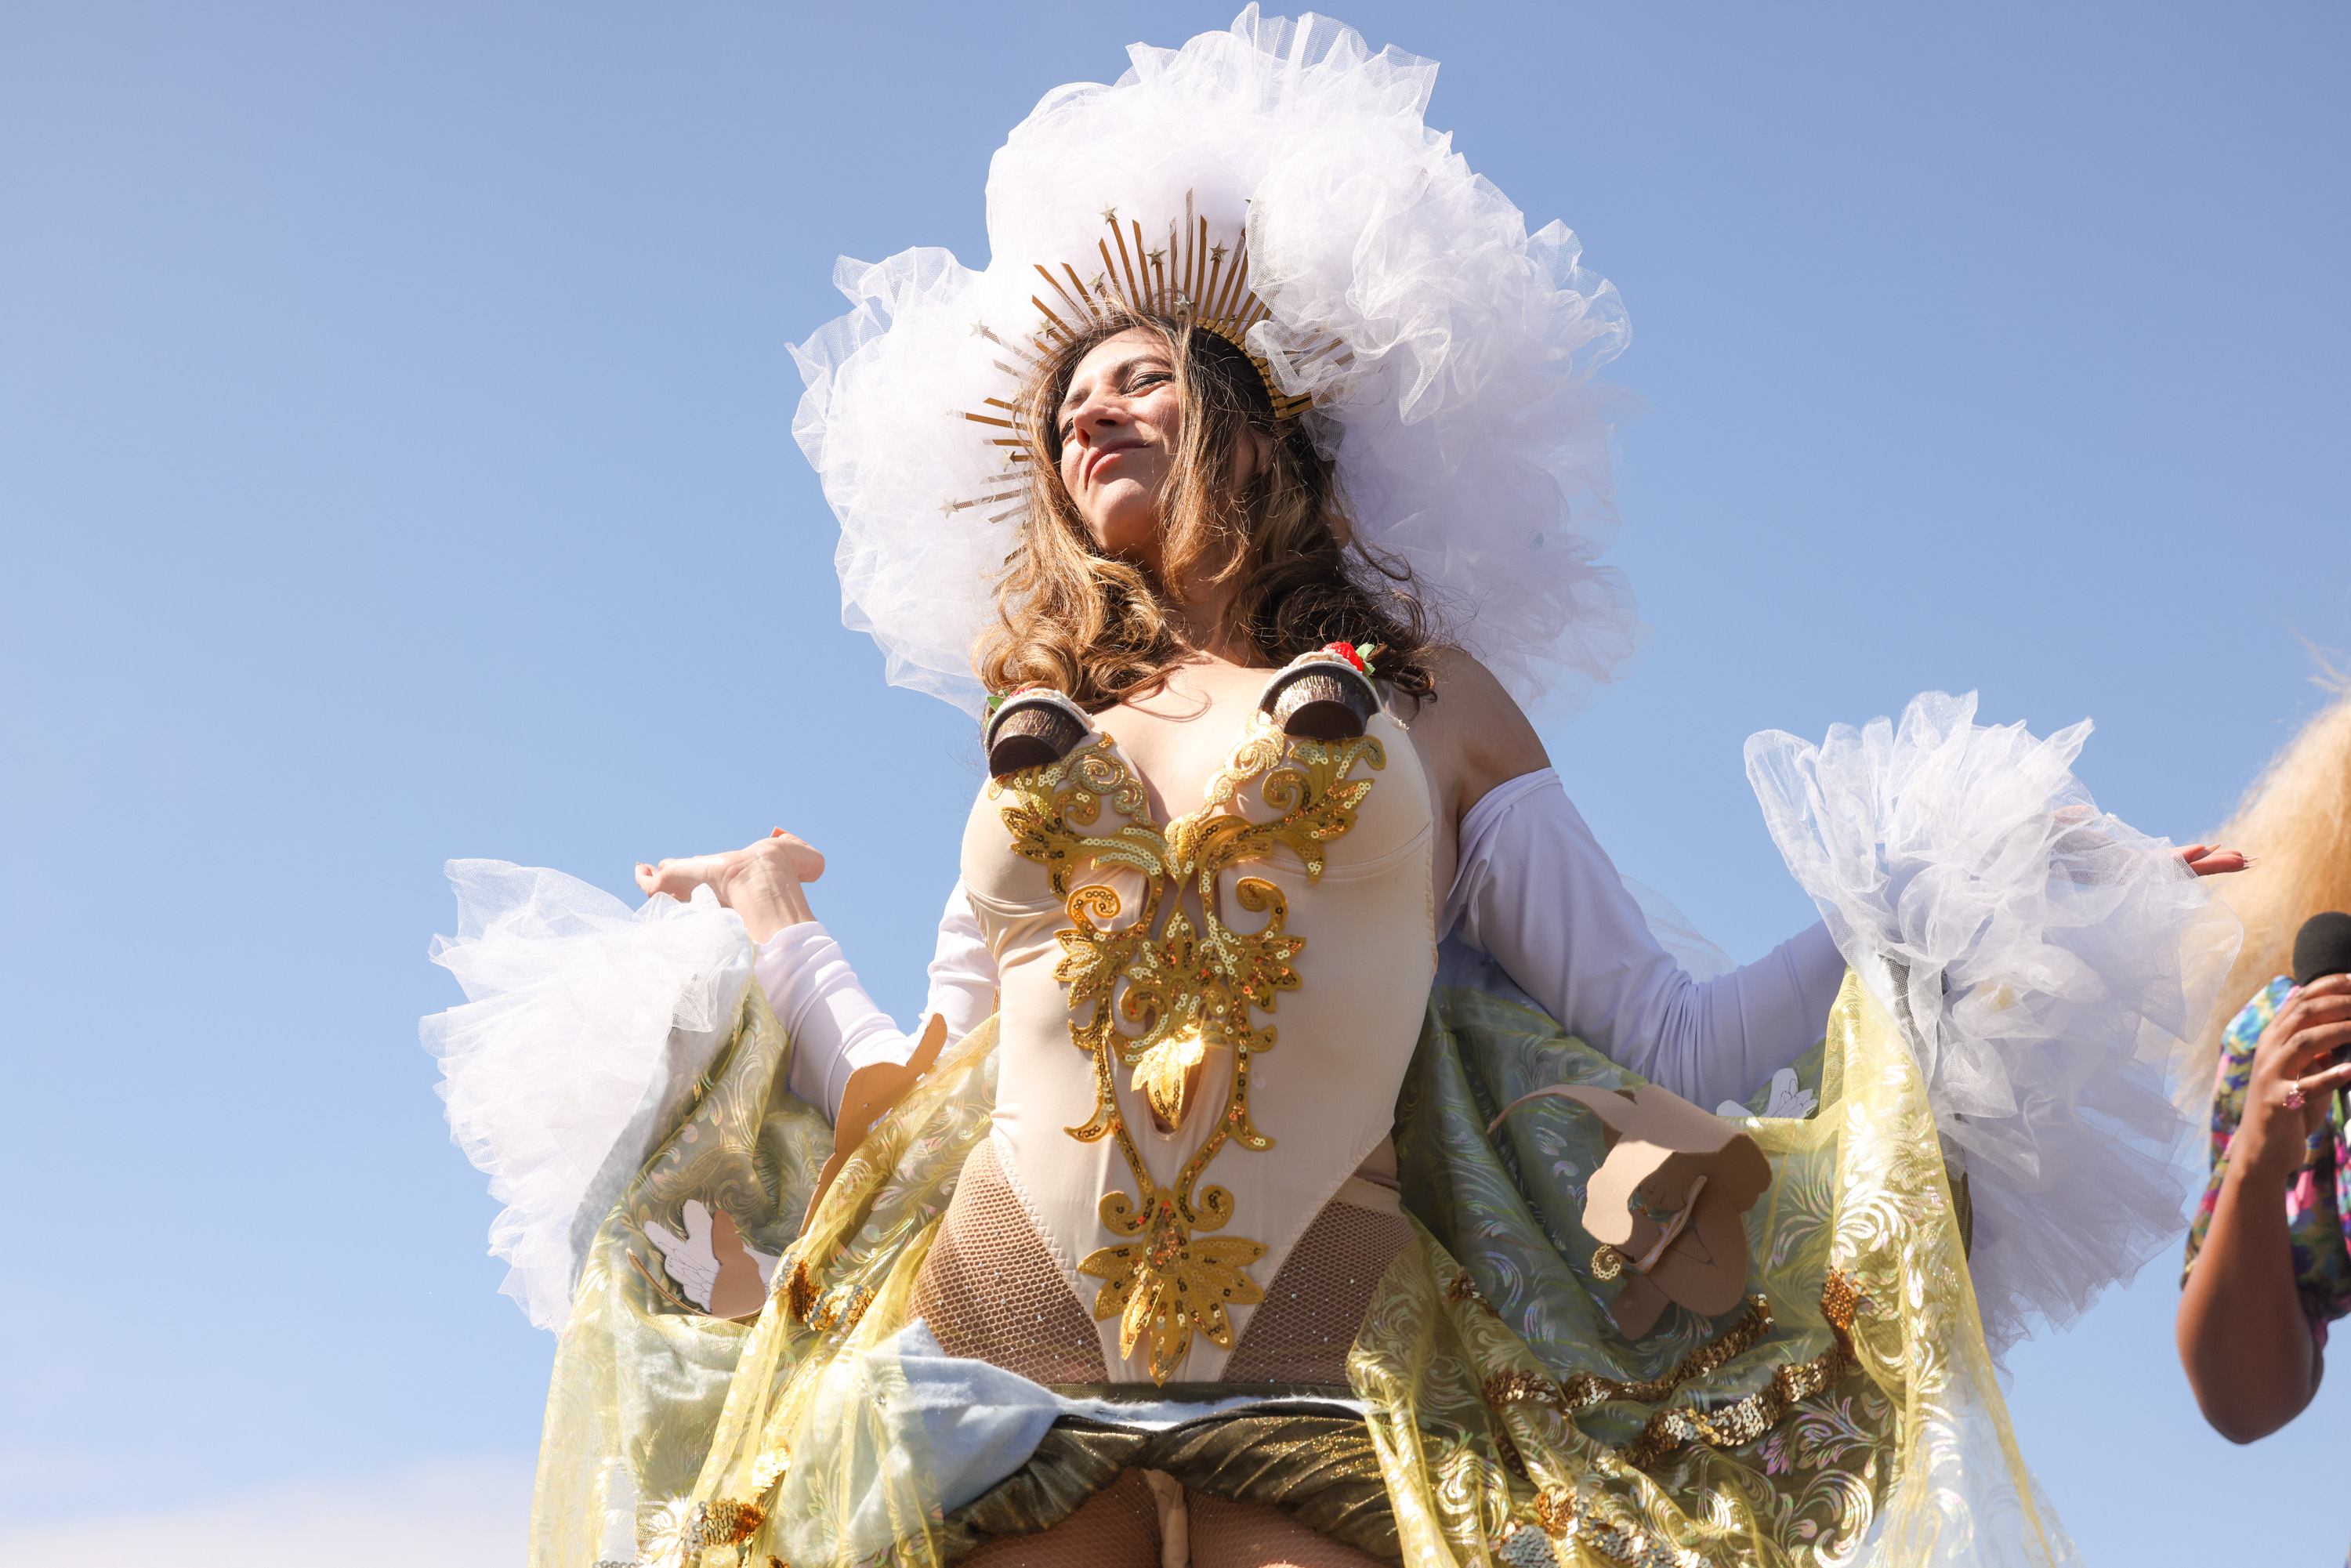 A person in a lavish costume with a large white headpiece is at an event. They exude confidence under a clear sky.